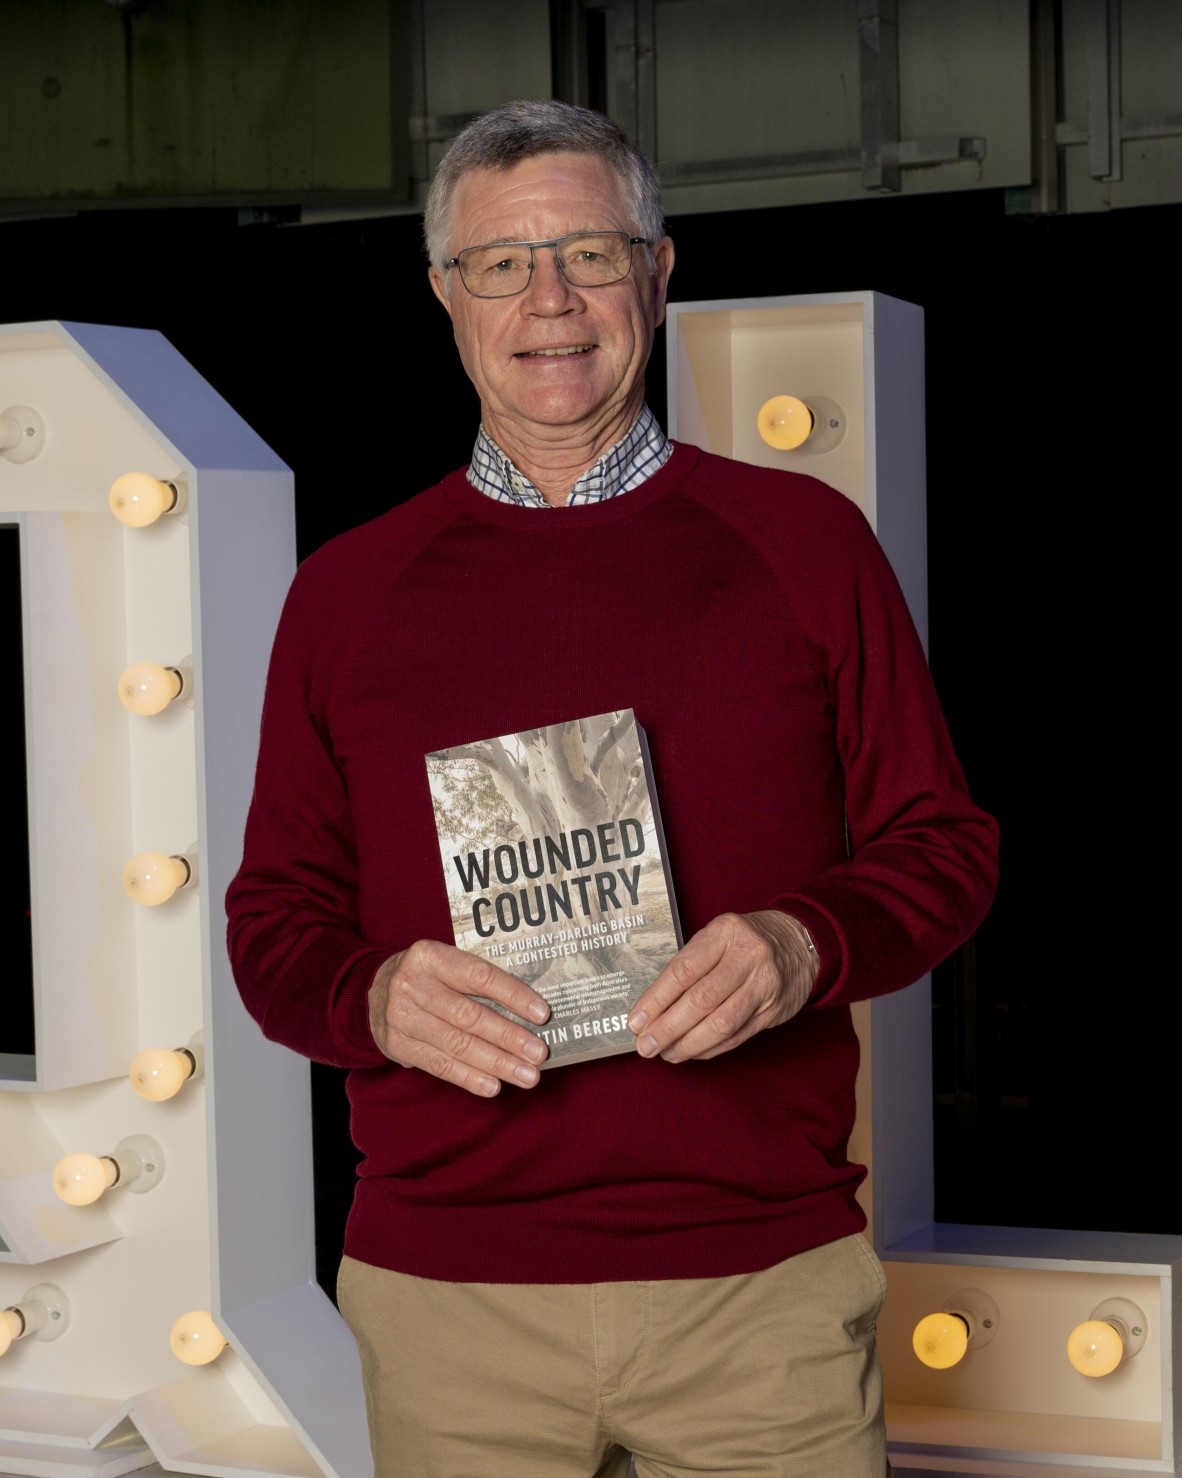 Quentin Beresford wears a red jumper and glasses He holds up a copy of his book Wounded Country with lights behind him 